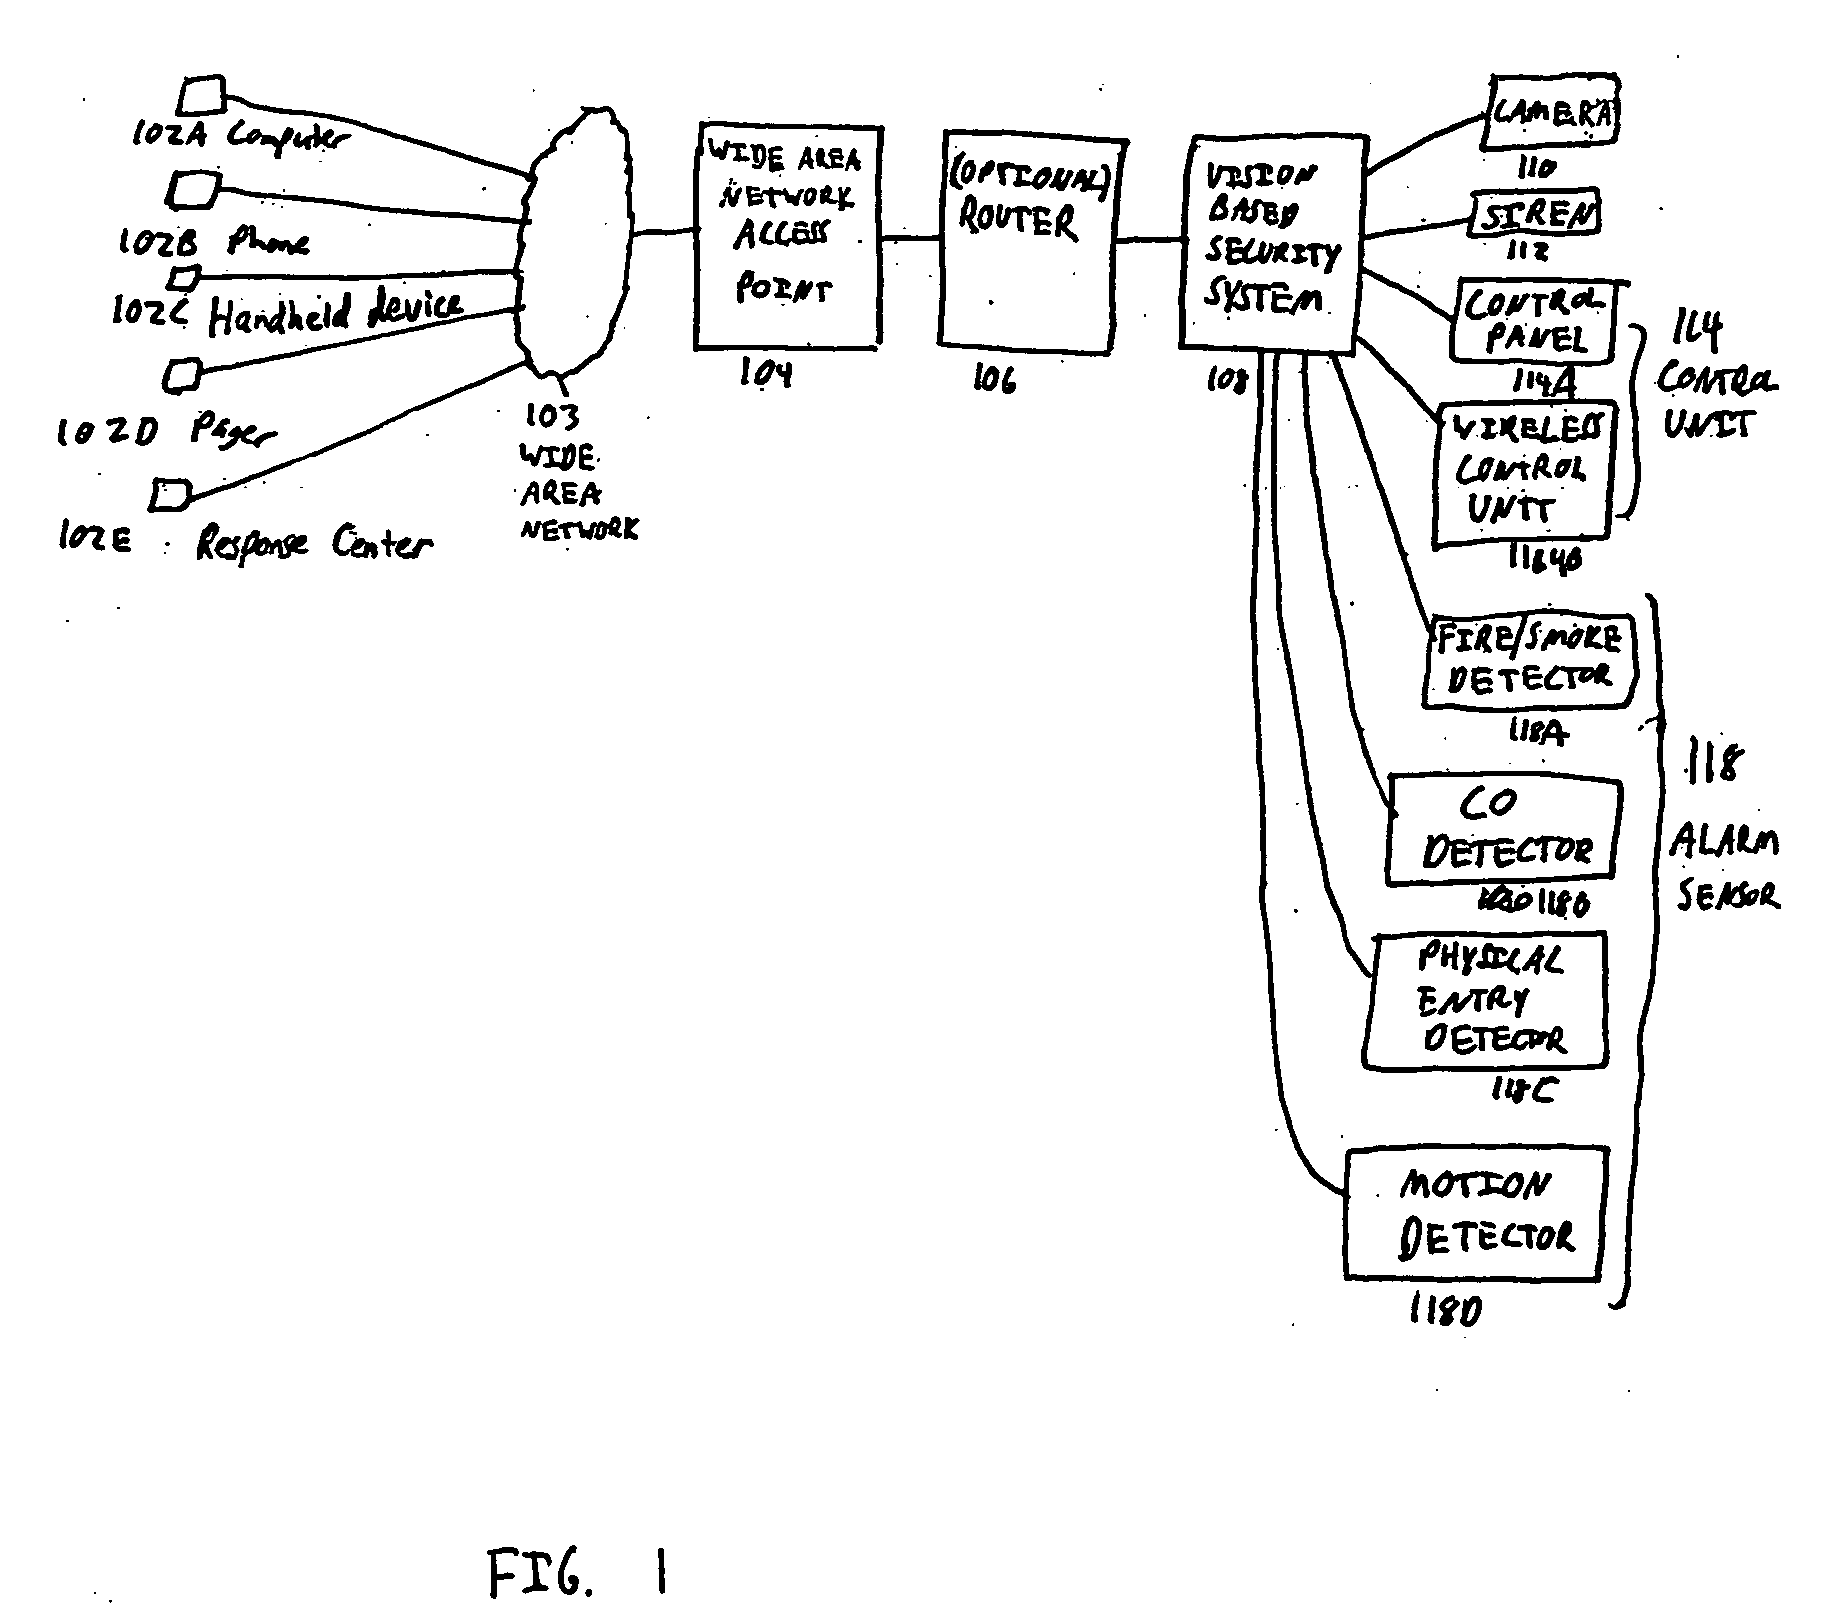 System and method for vision-based security